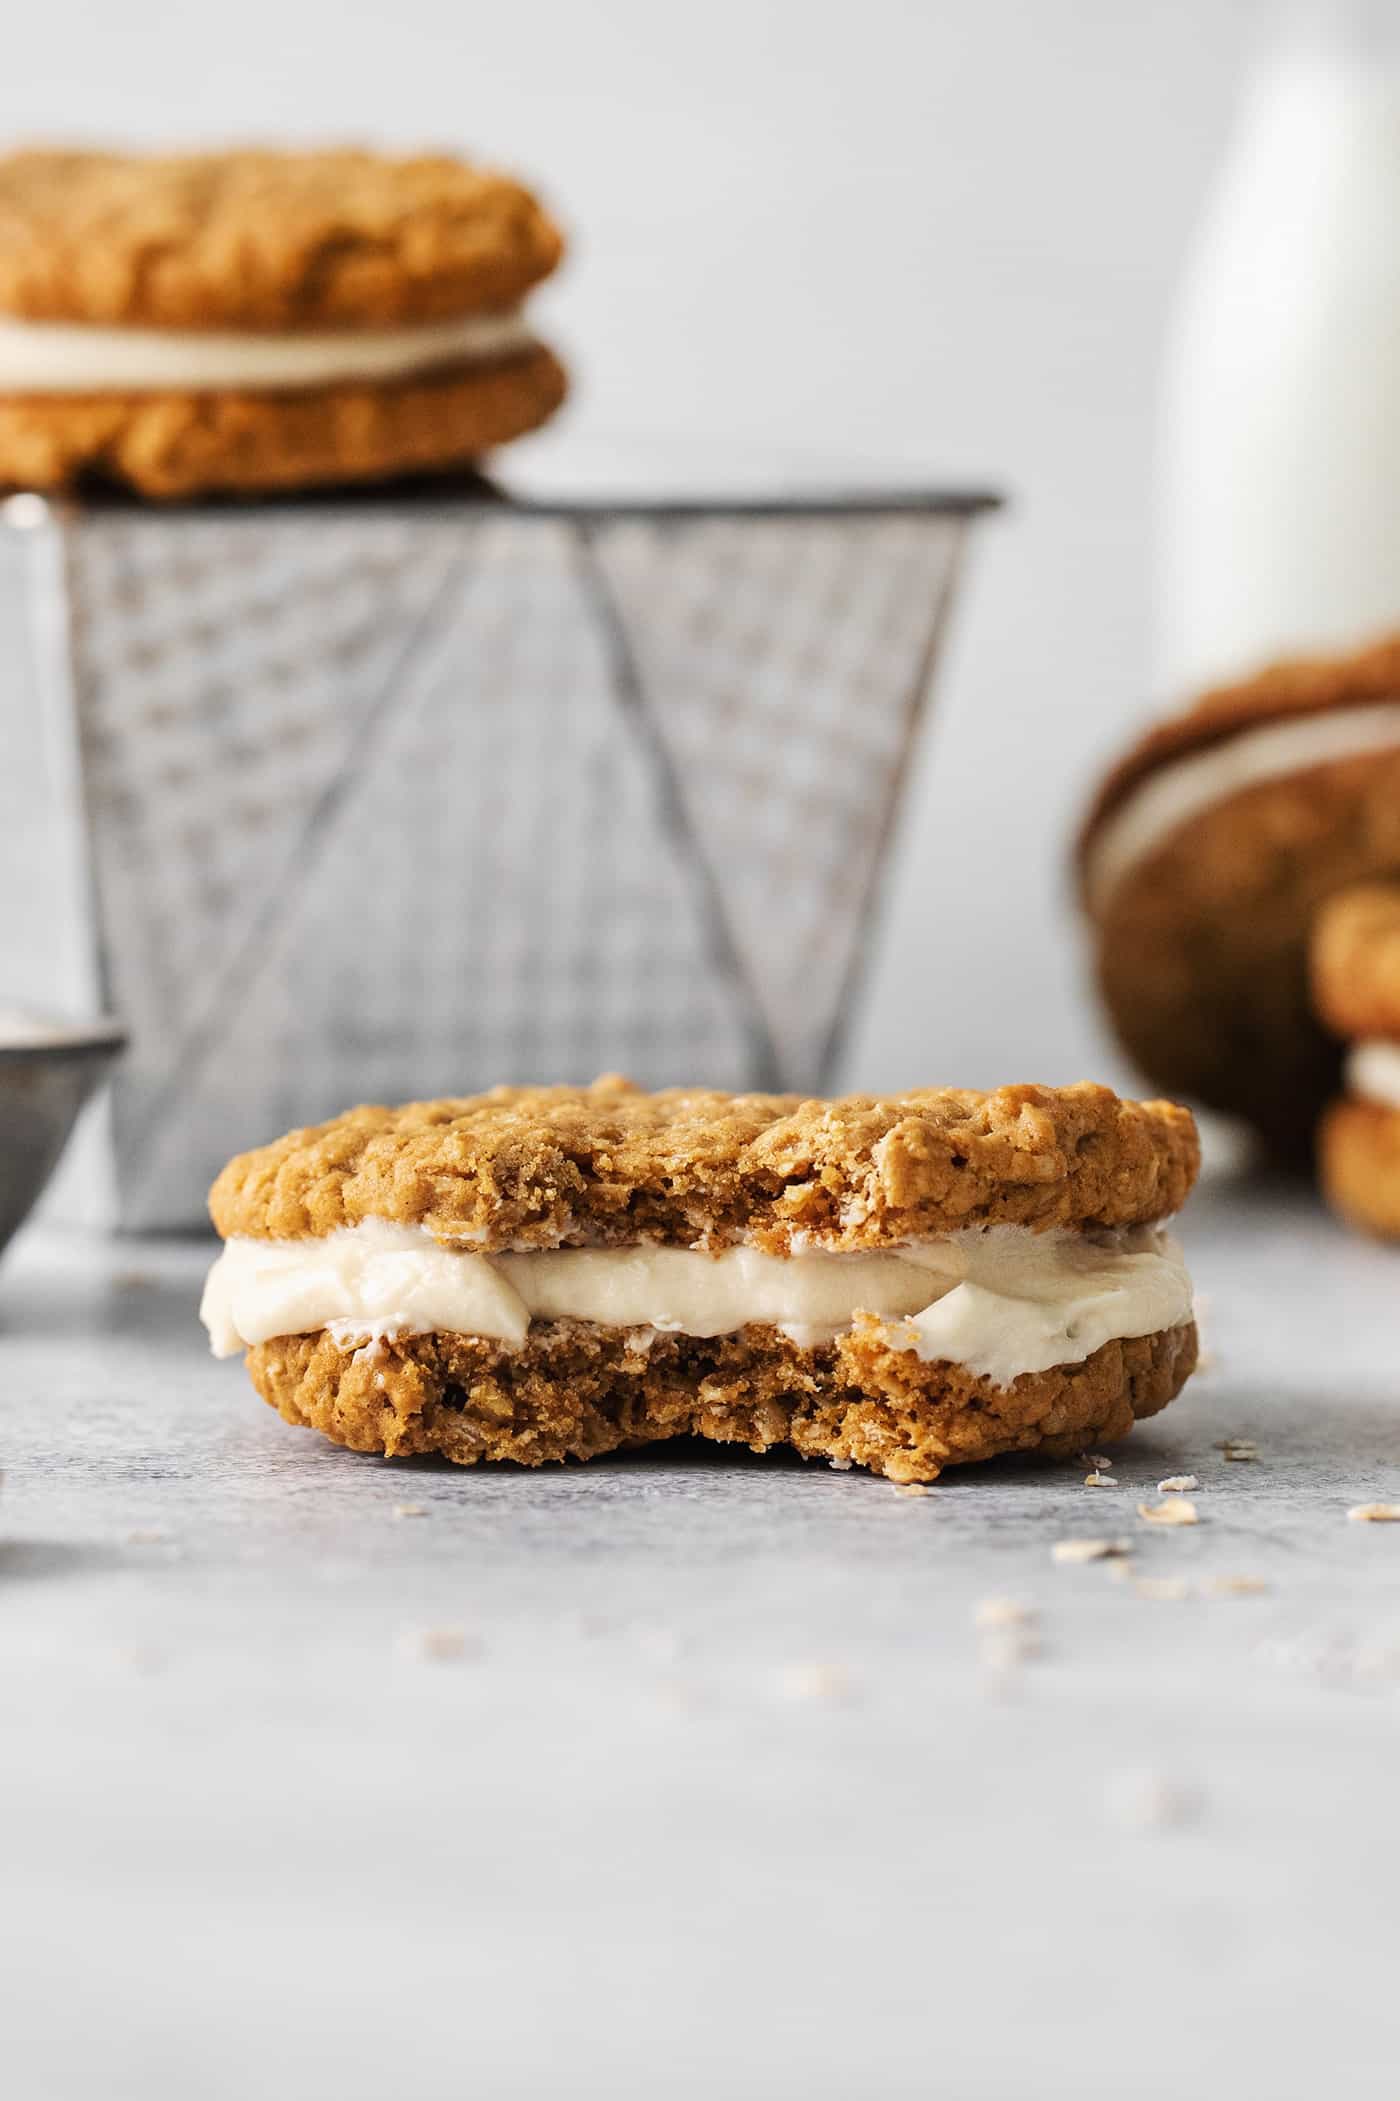 An oatmeal creme pie with a bite missing